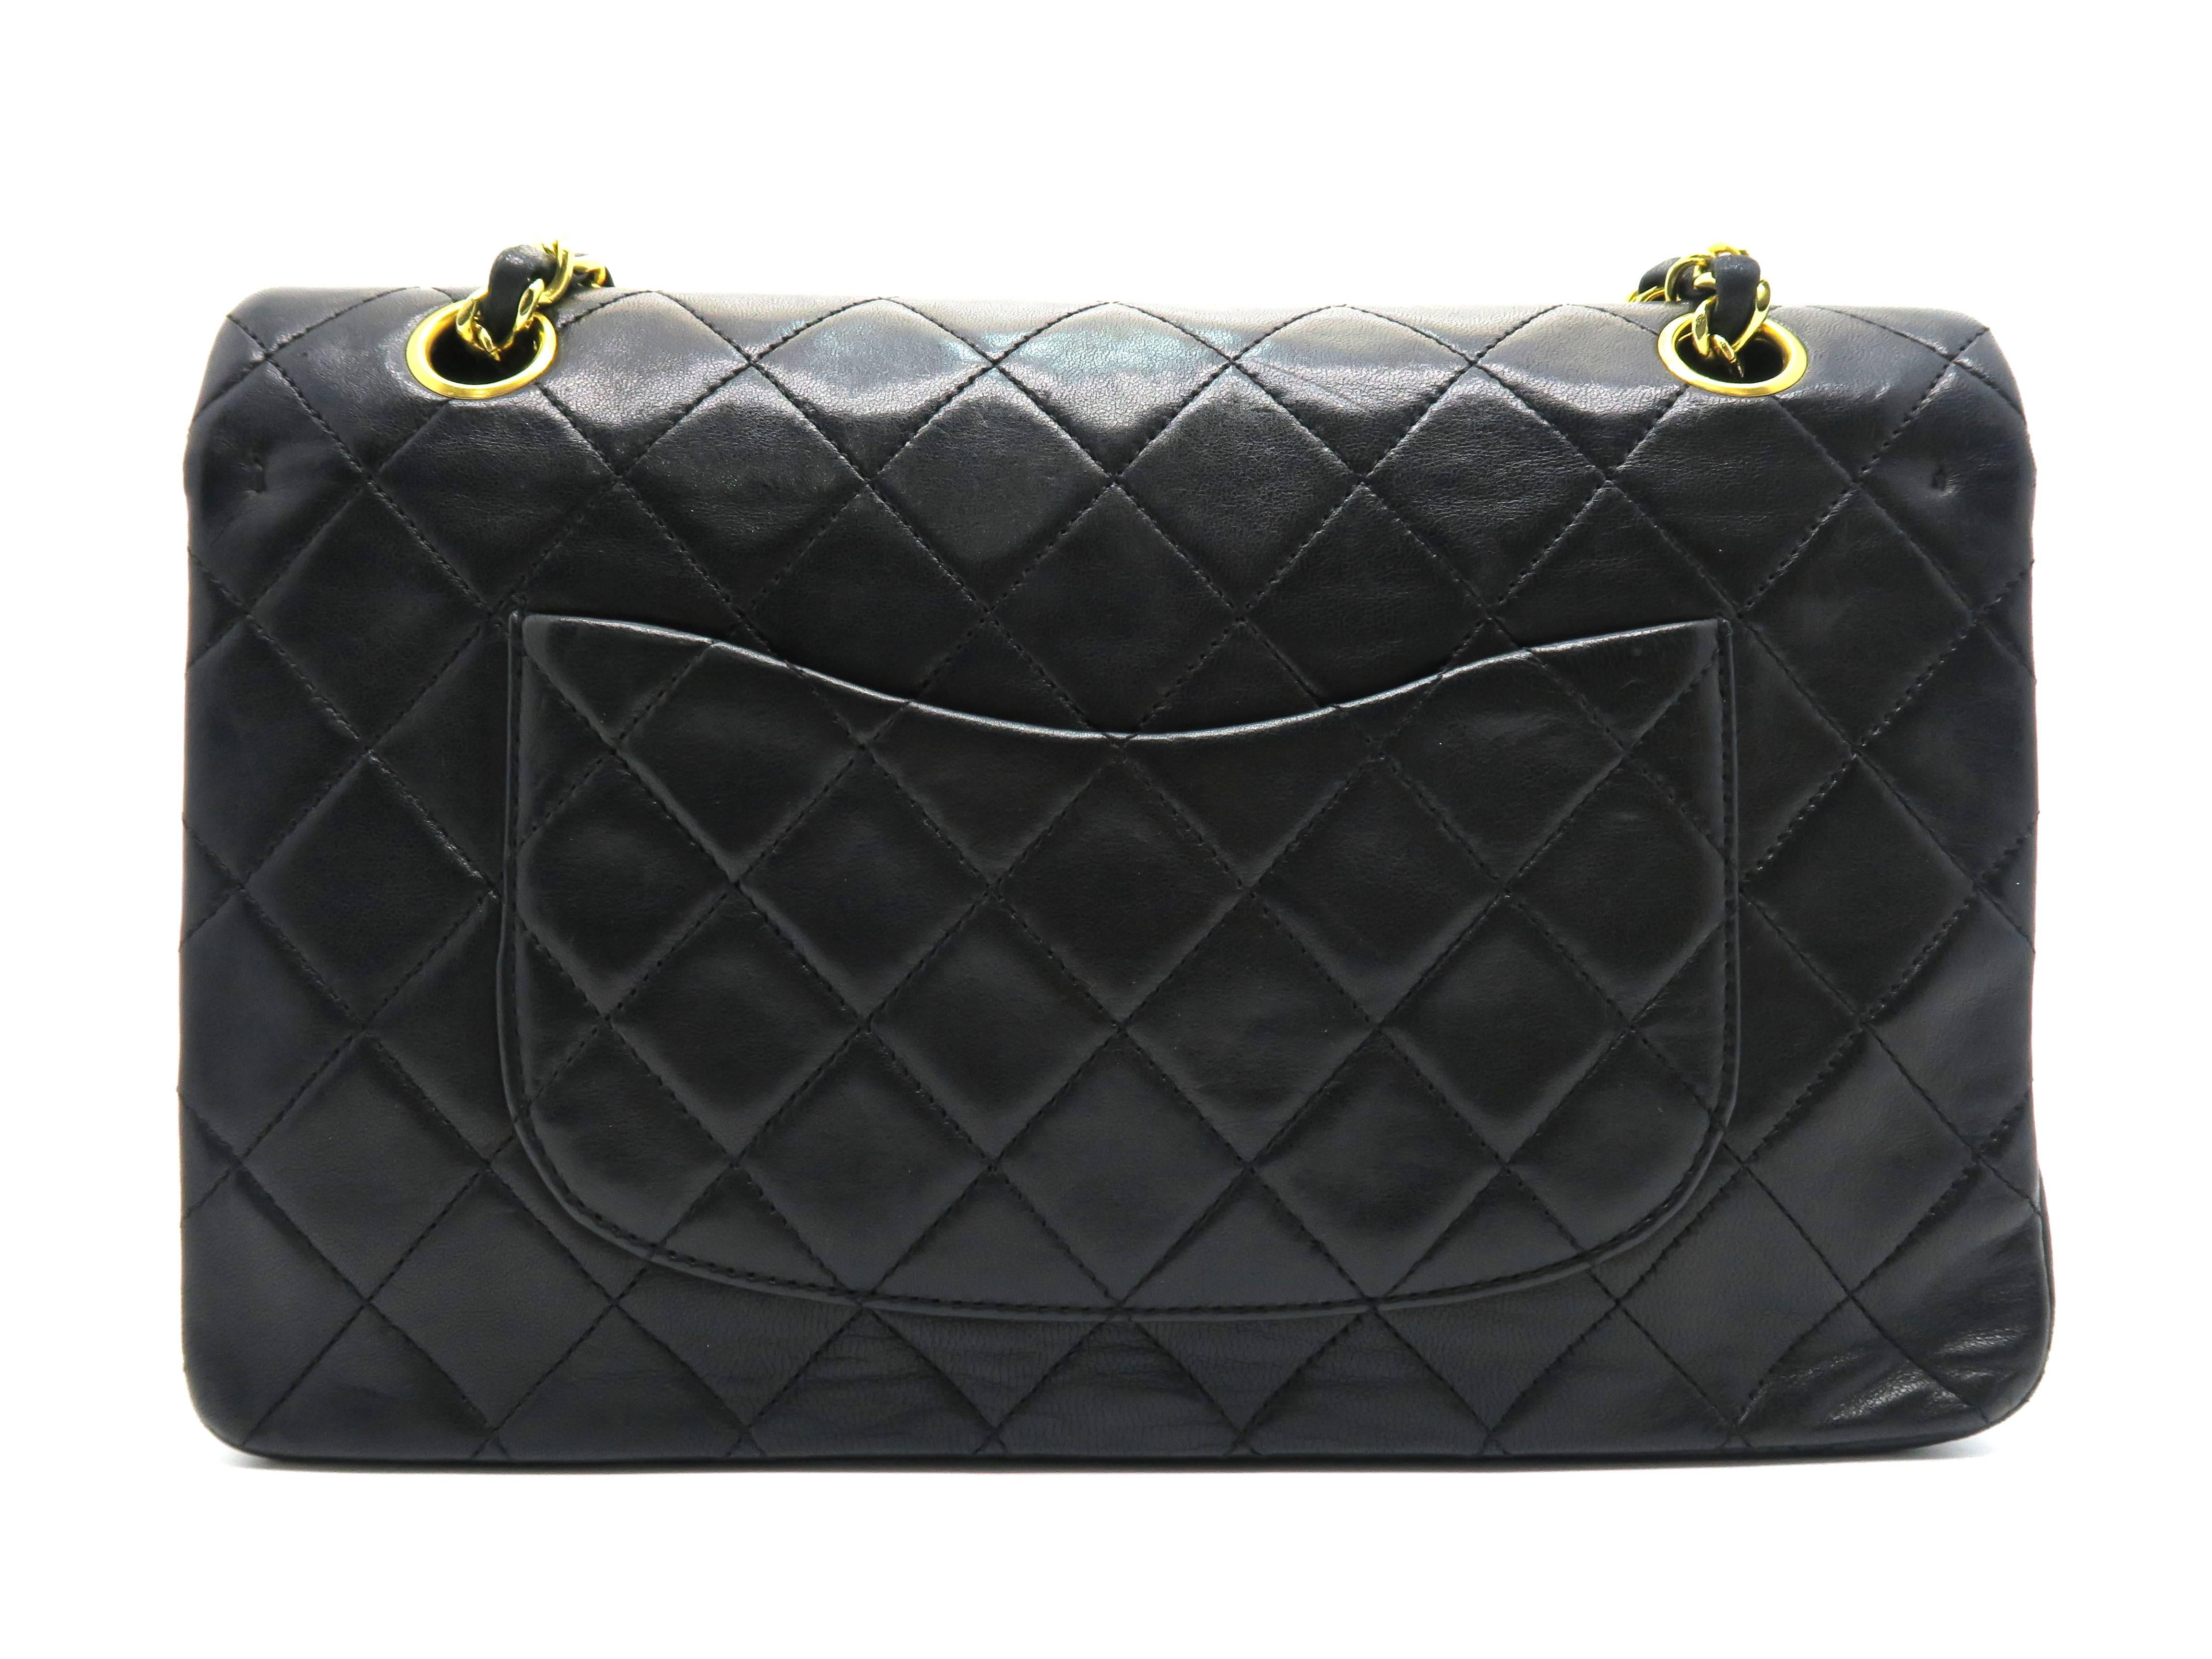 Chanel Quilting Lambskin Classic Double Flap Gold Metal Flap Bag Black In Good Condition For Sale In Kowloon, HK